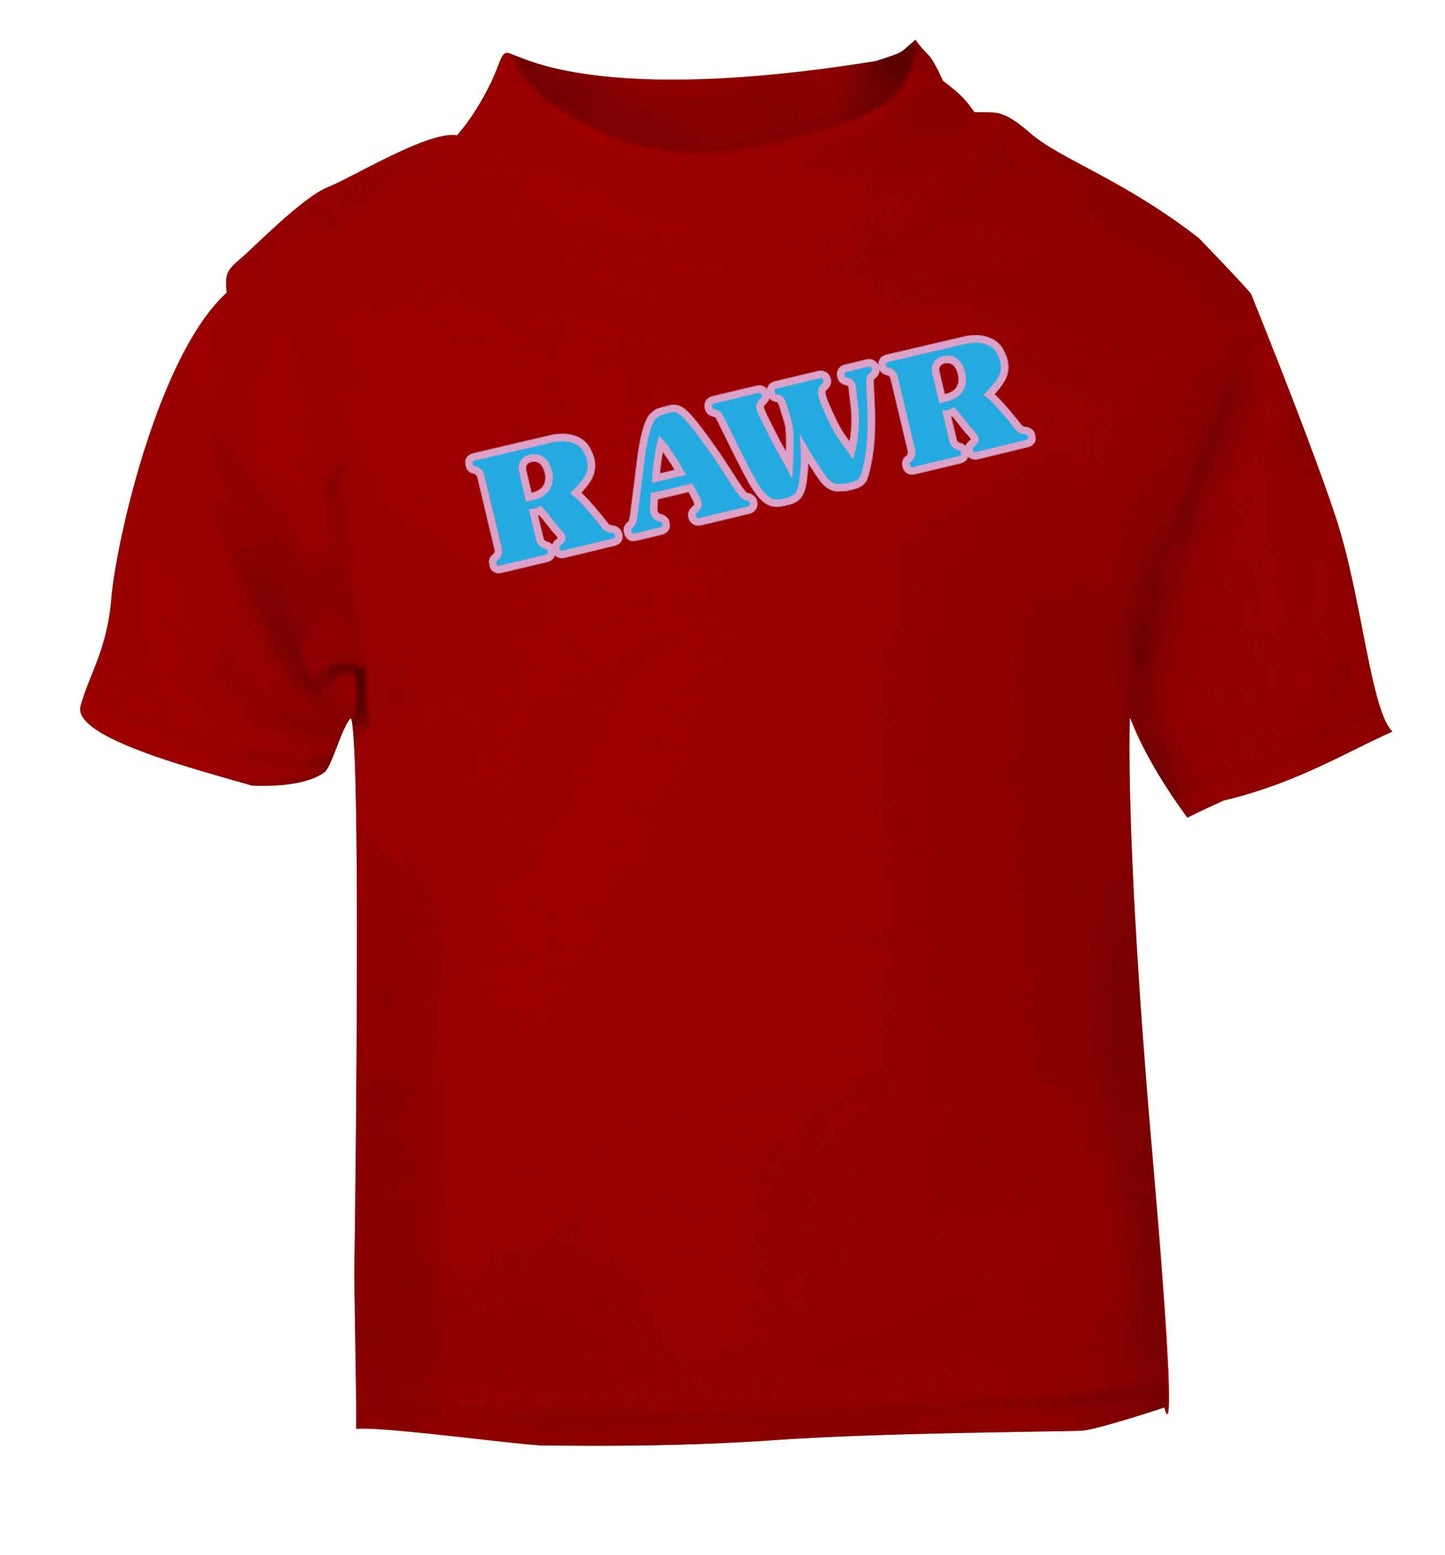 Rawr red baby toddler Tshirt 2 Years